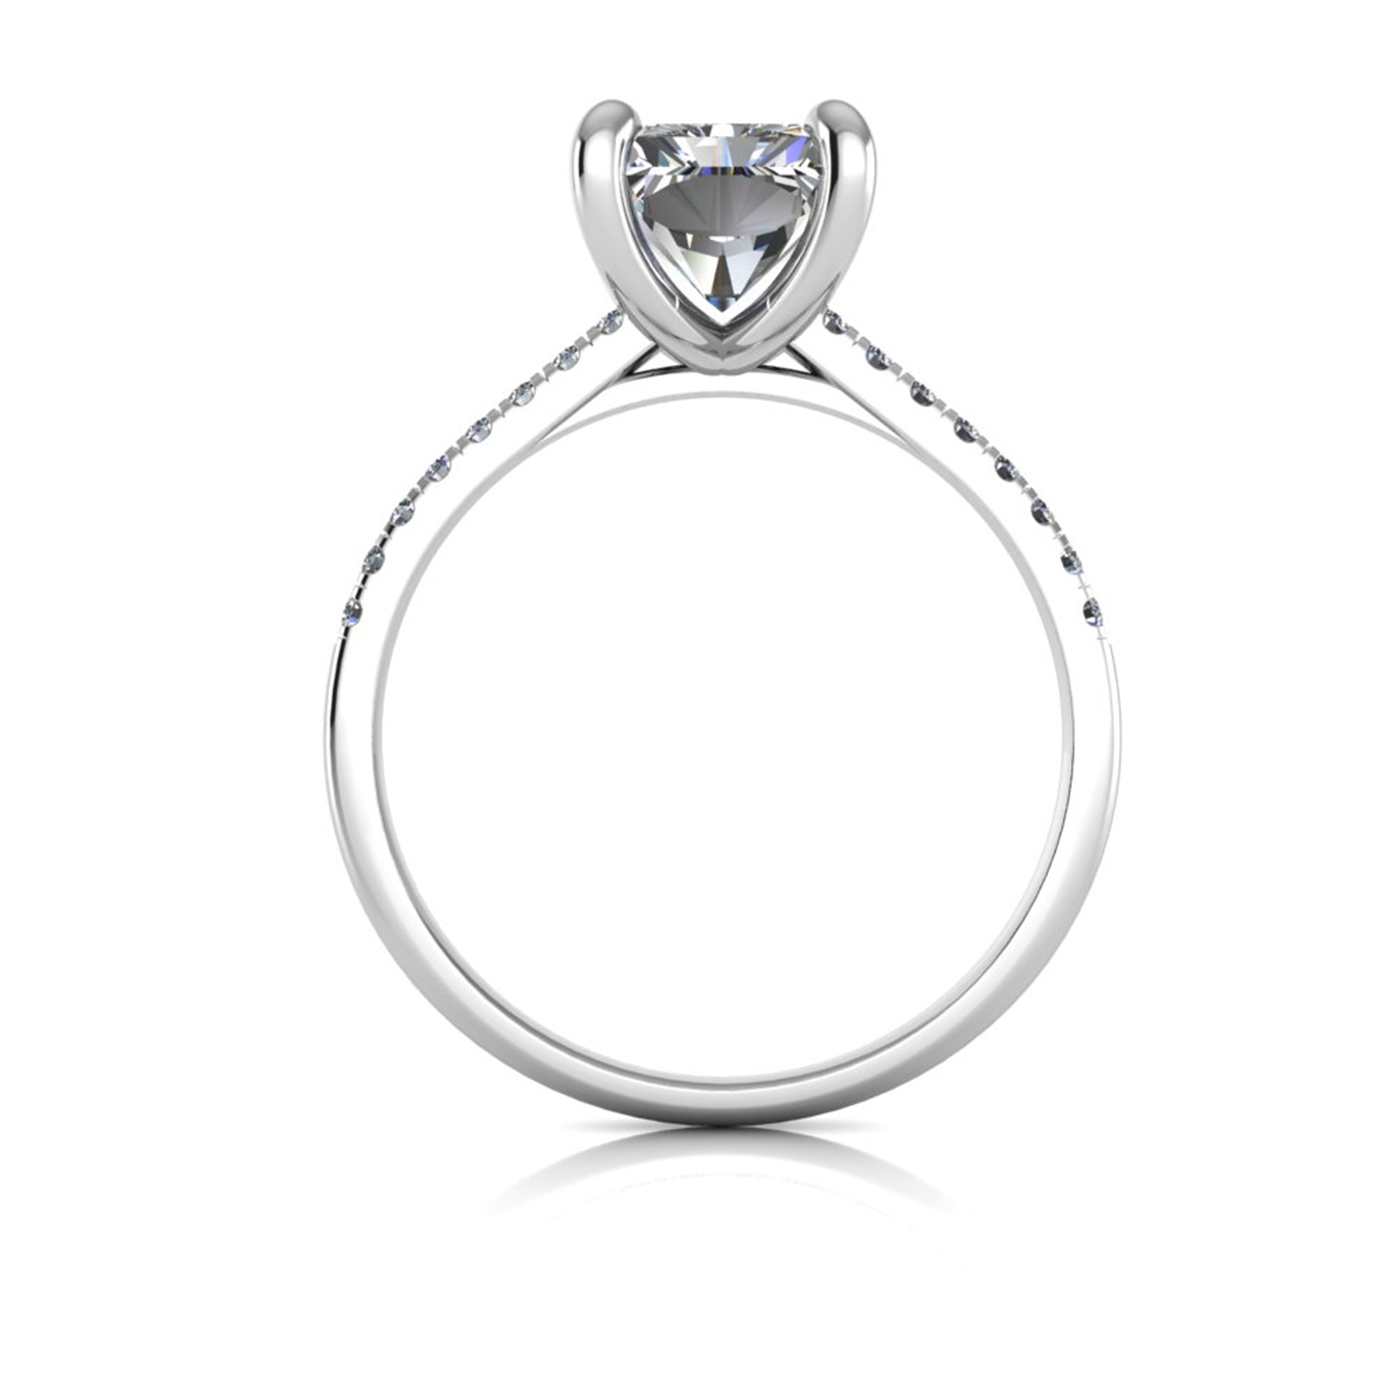 18k white gold  2,50 ct 4 prongs radiant cut diamond engagement ring with whisper thin pavÉ set band